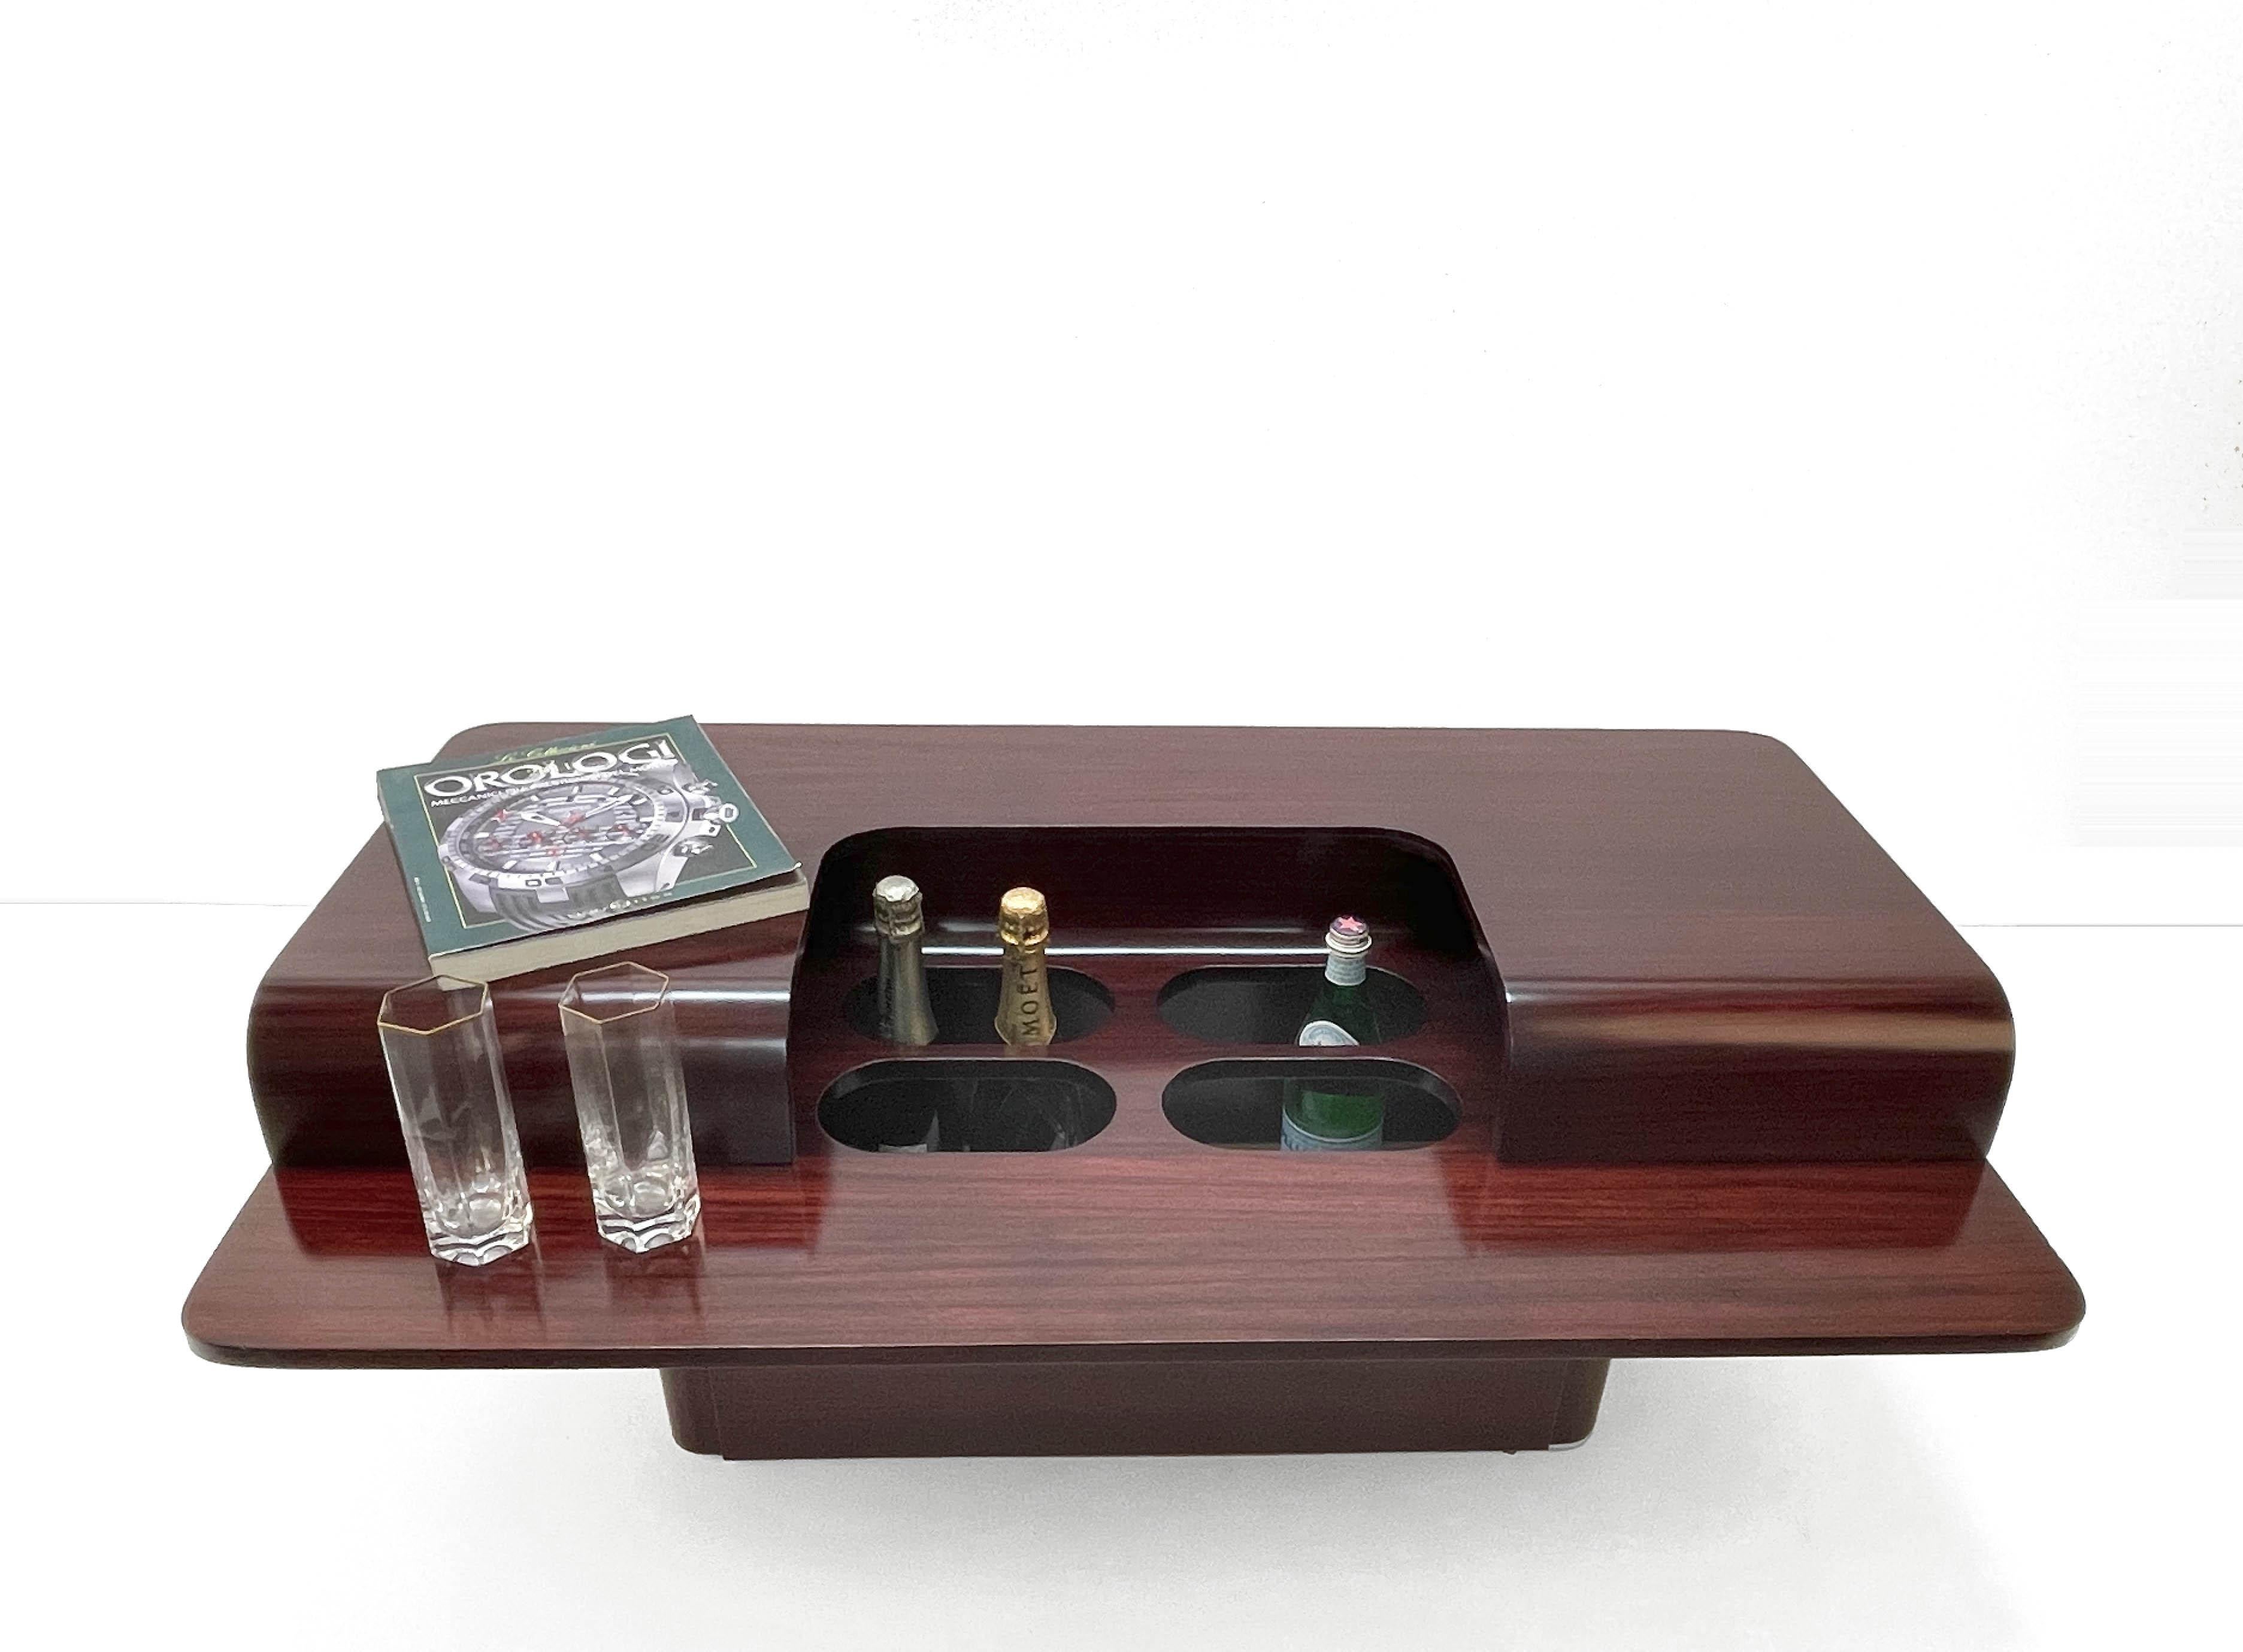 Midcentury Italian Dark Brown Wooden Coffee Table with Bottle Holders, 1970s For Sale 3